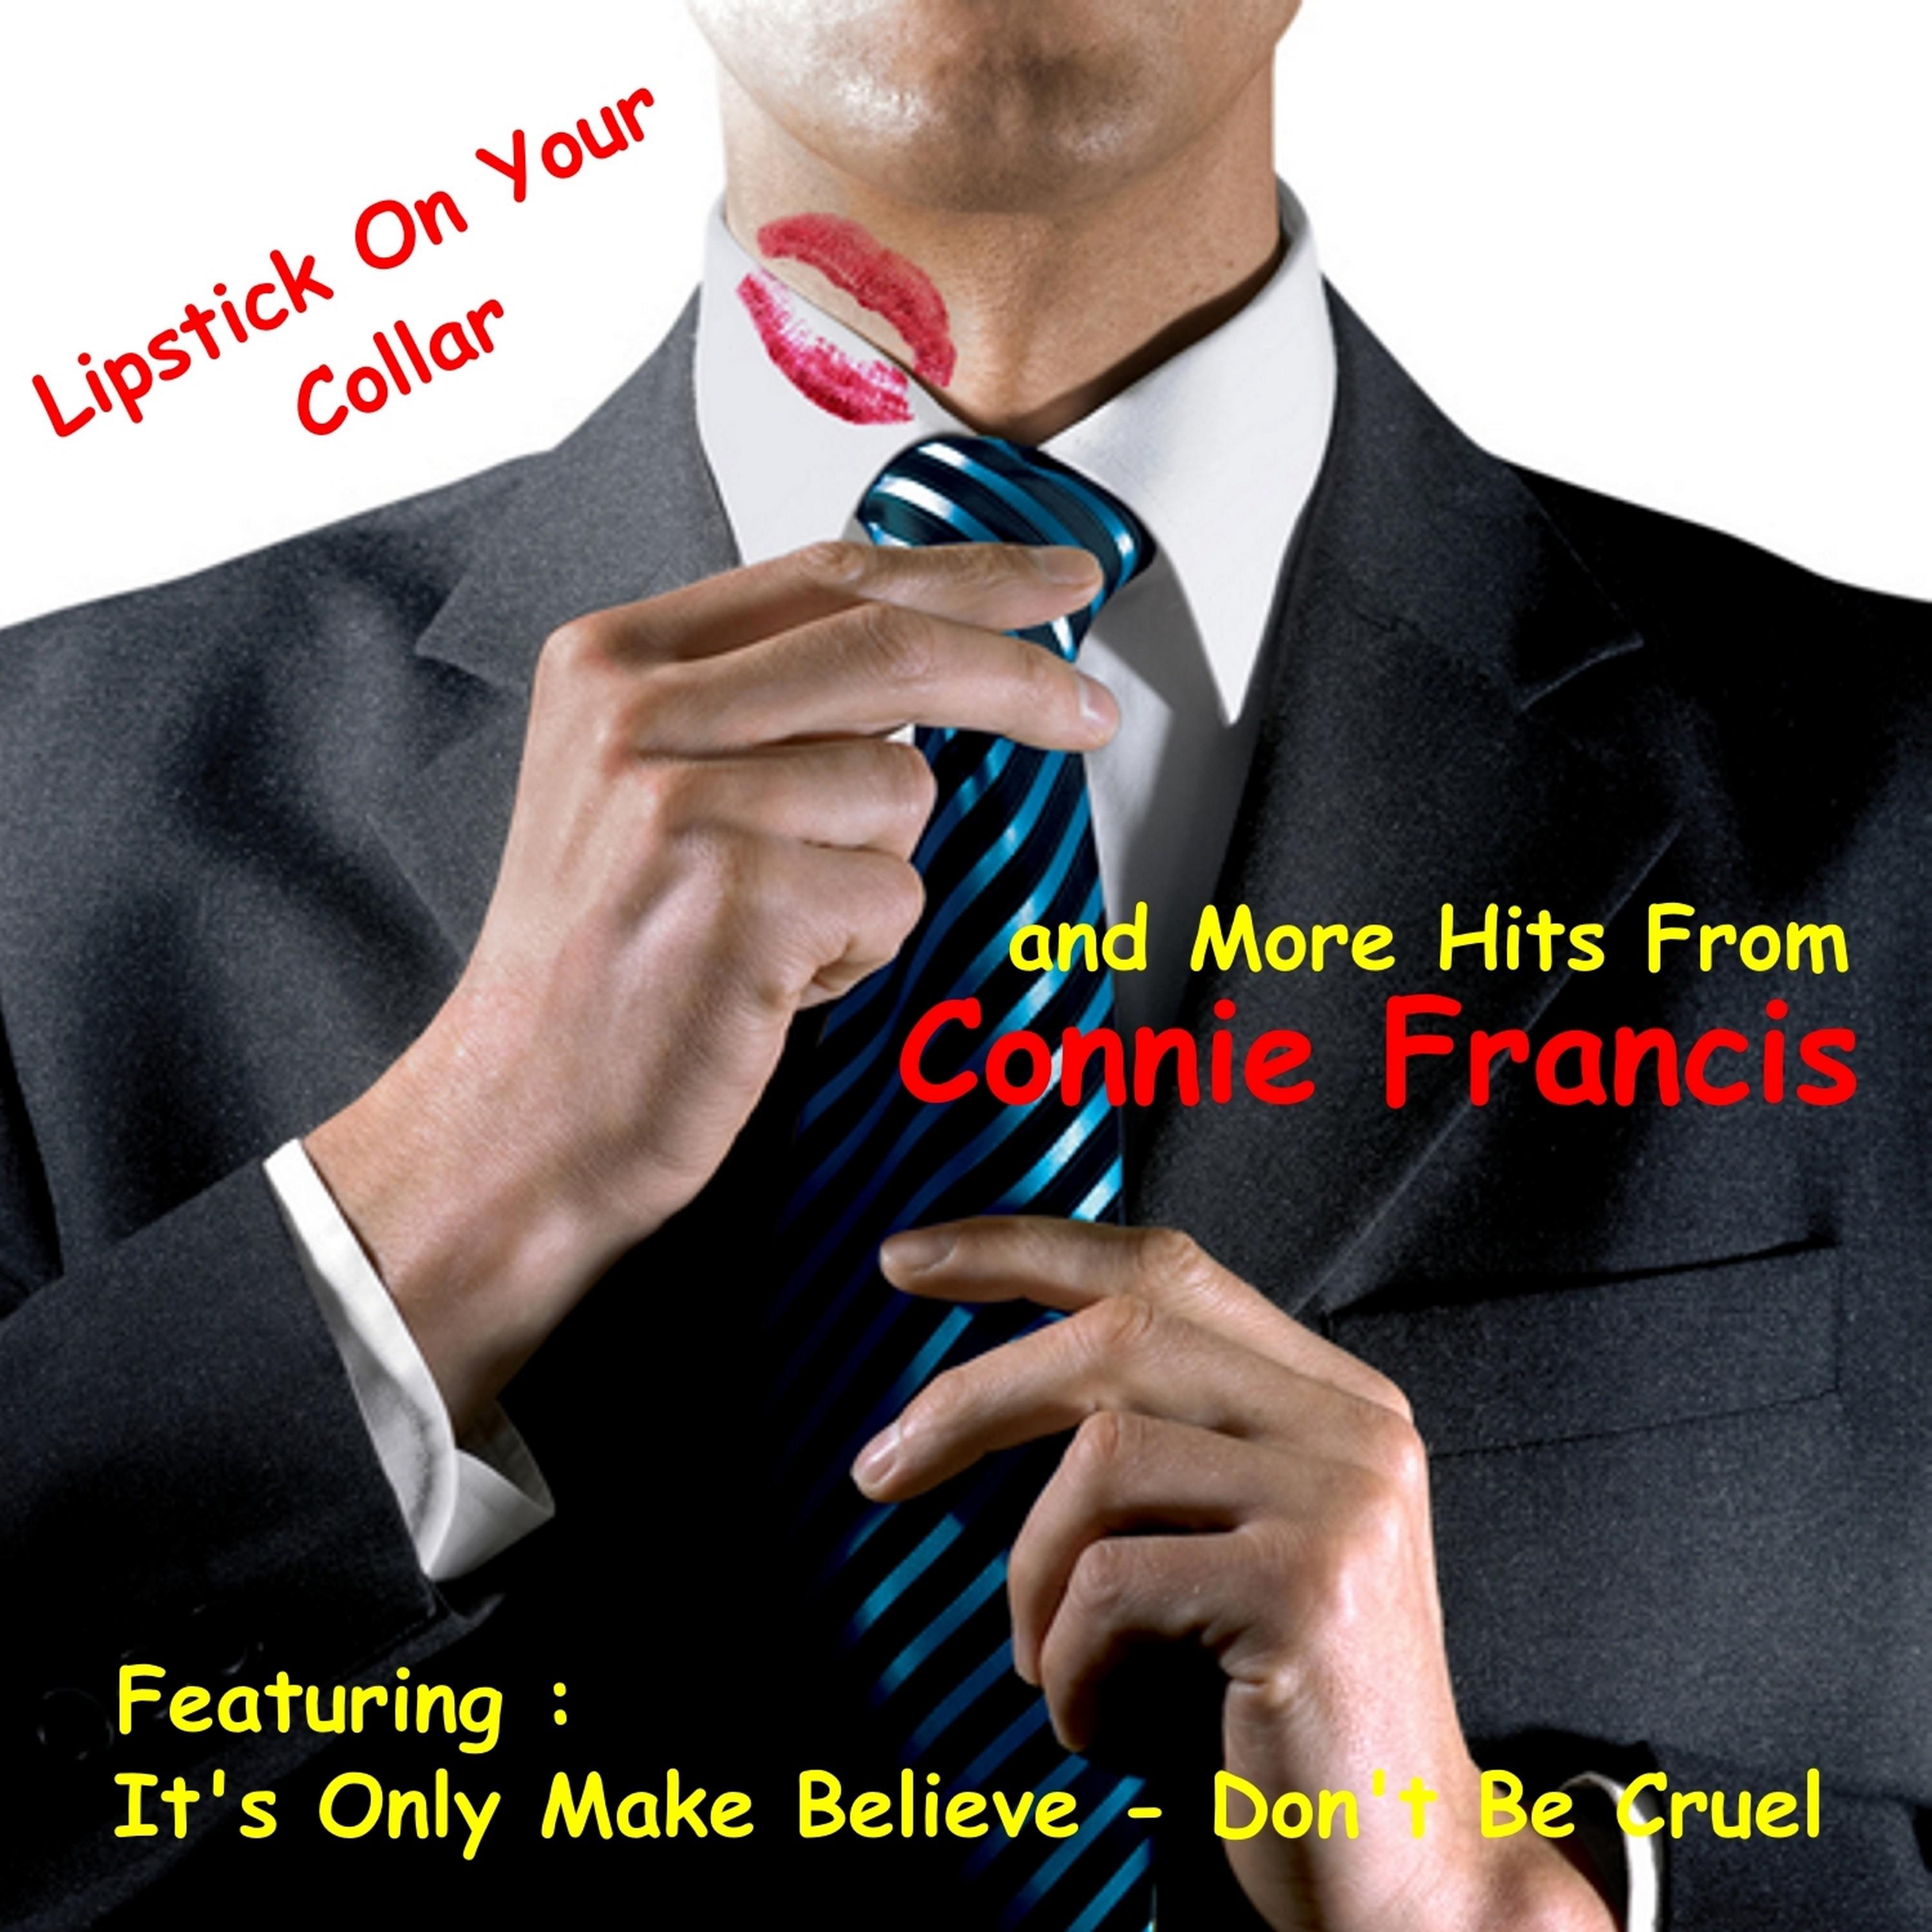 Lipstick on Your Collar + More Hits